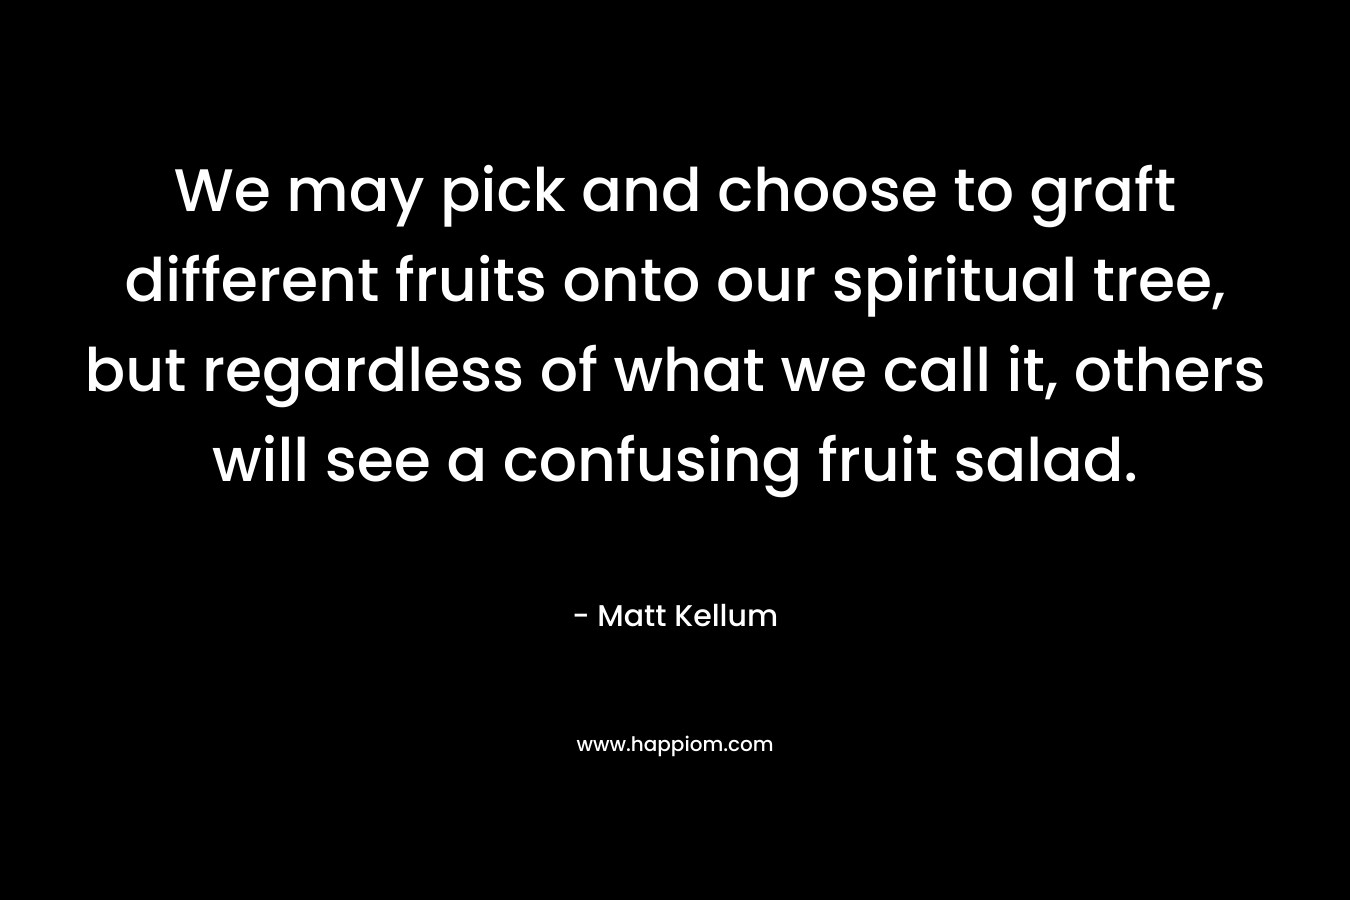 We may pick and choose to graft different fruits onto our spiritual tree, but regardless of what we call it, others will see a confusing fruit salad. – Matt Kellum